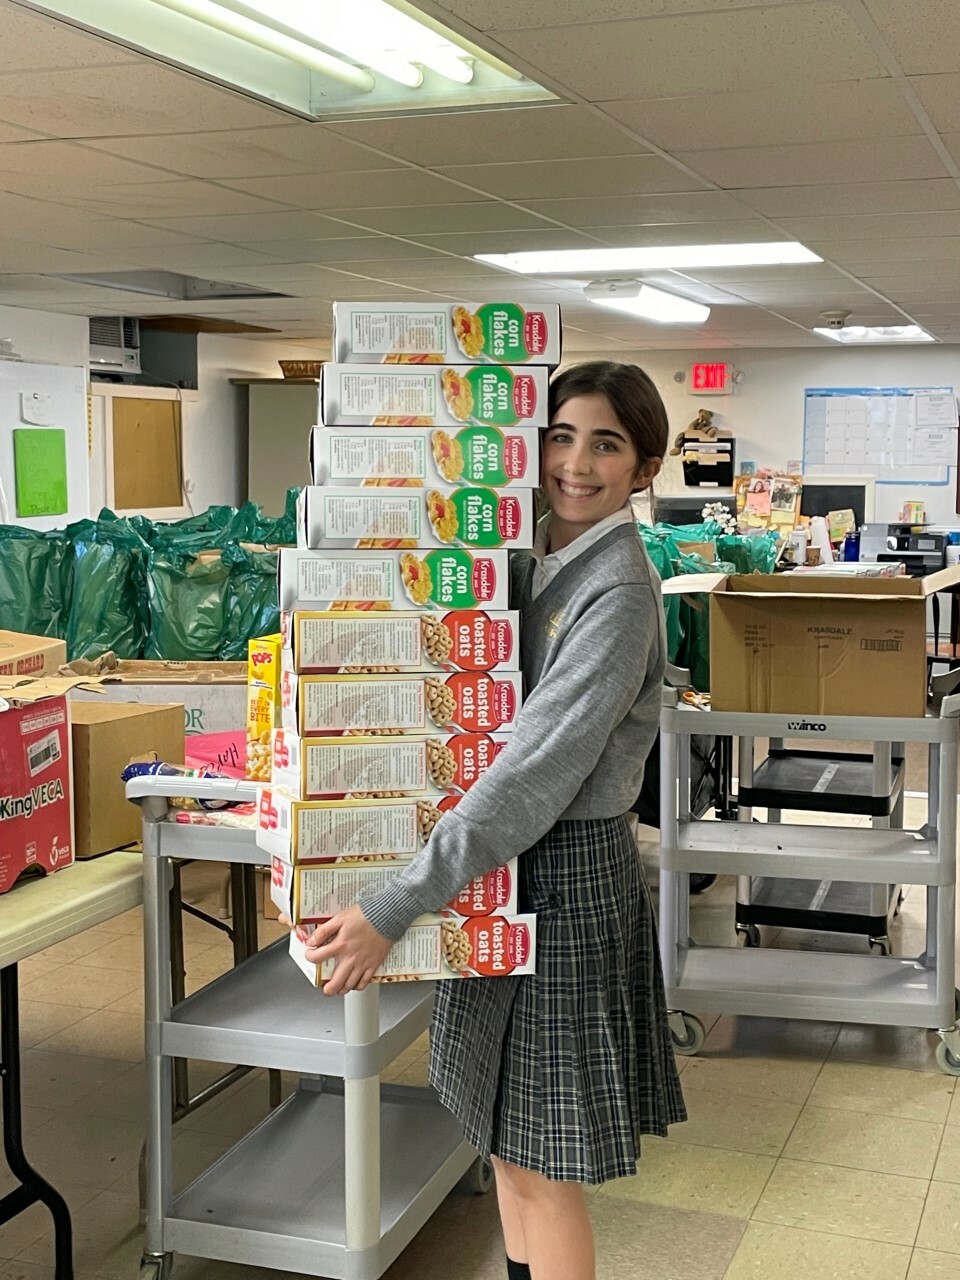 Our Lady of the Hamptons School Prep 8 student Emma Tillotson volunteers at Heart of the Hamptons food pantry stocking shelves as part of her service work. COURTESY OUR LADY OF THE HAMPTONS SCHOOL